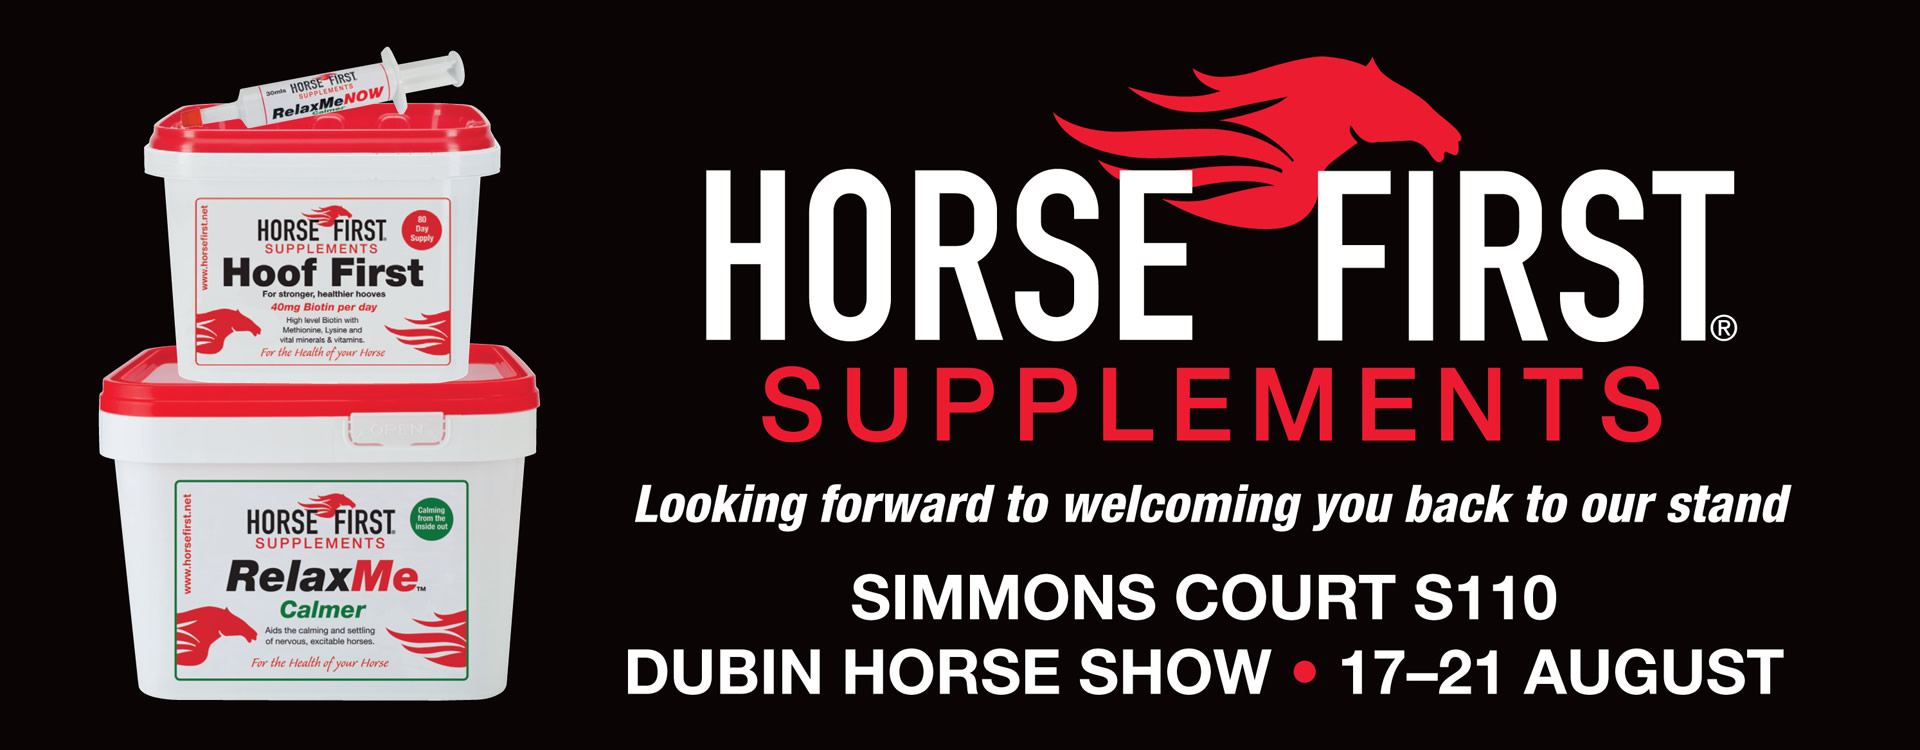 Visit Horse First at Dublin Horse Show